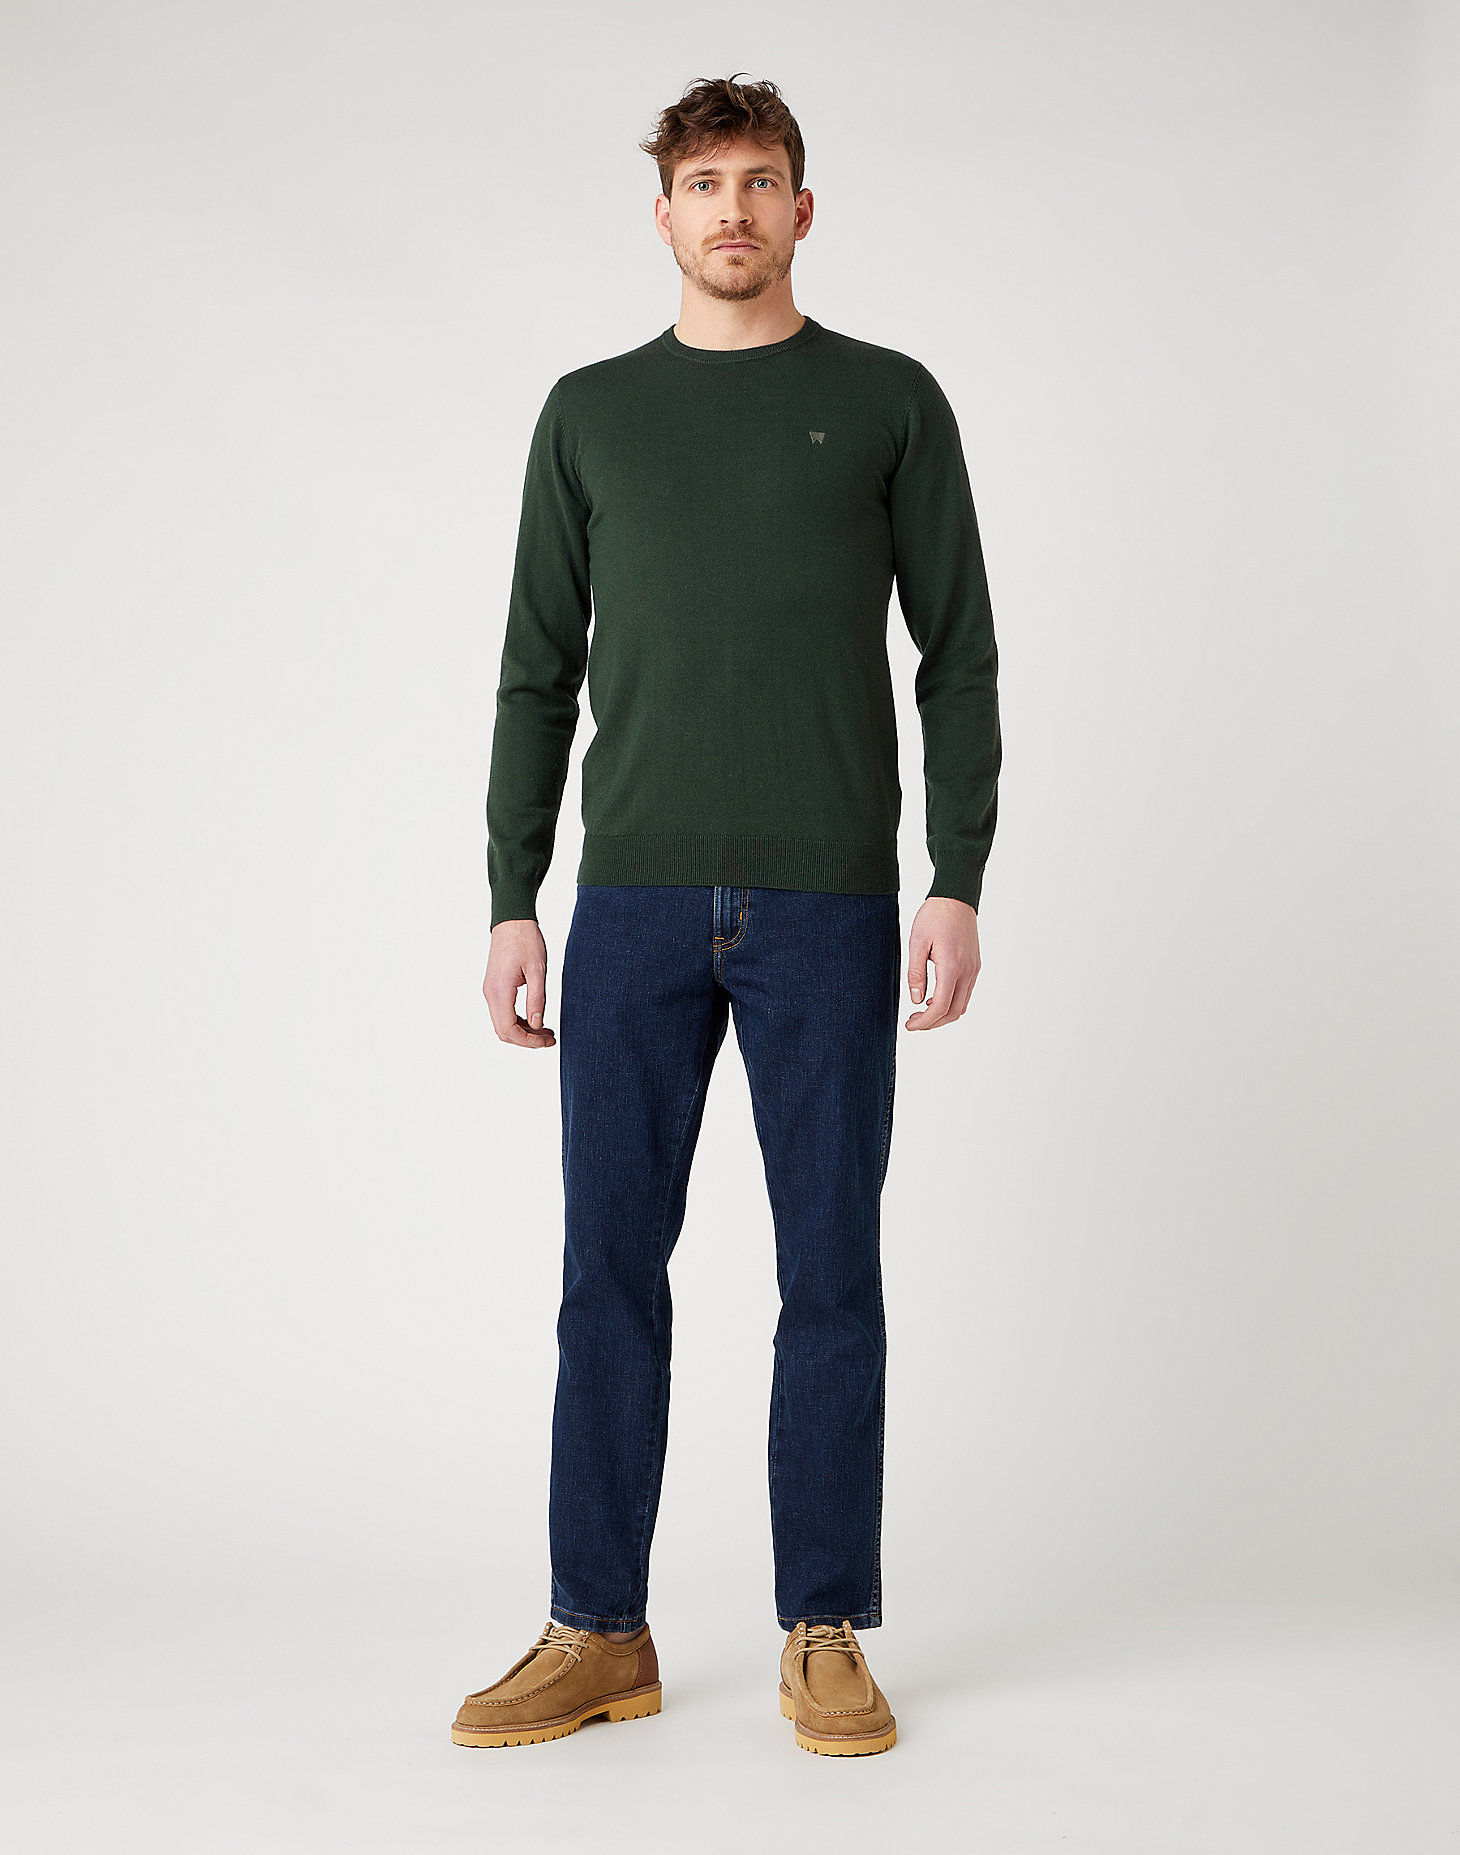 Crewneck Knit in Deep Forest alternative view 1